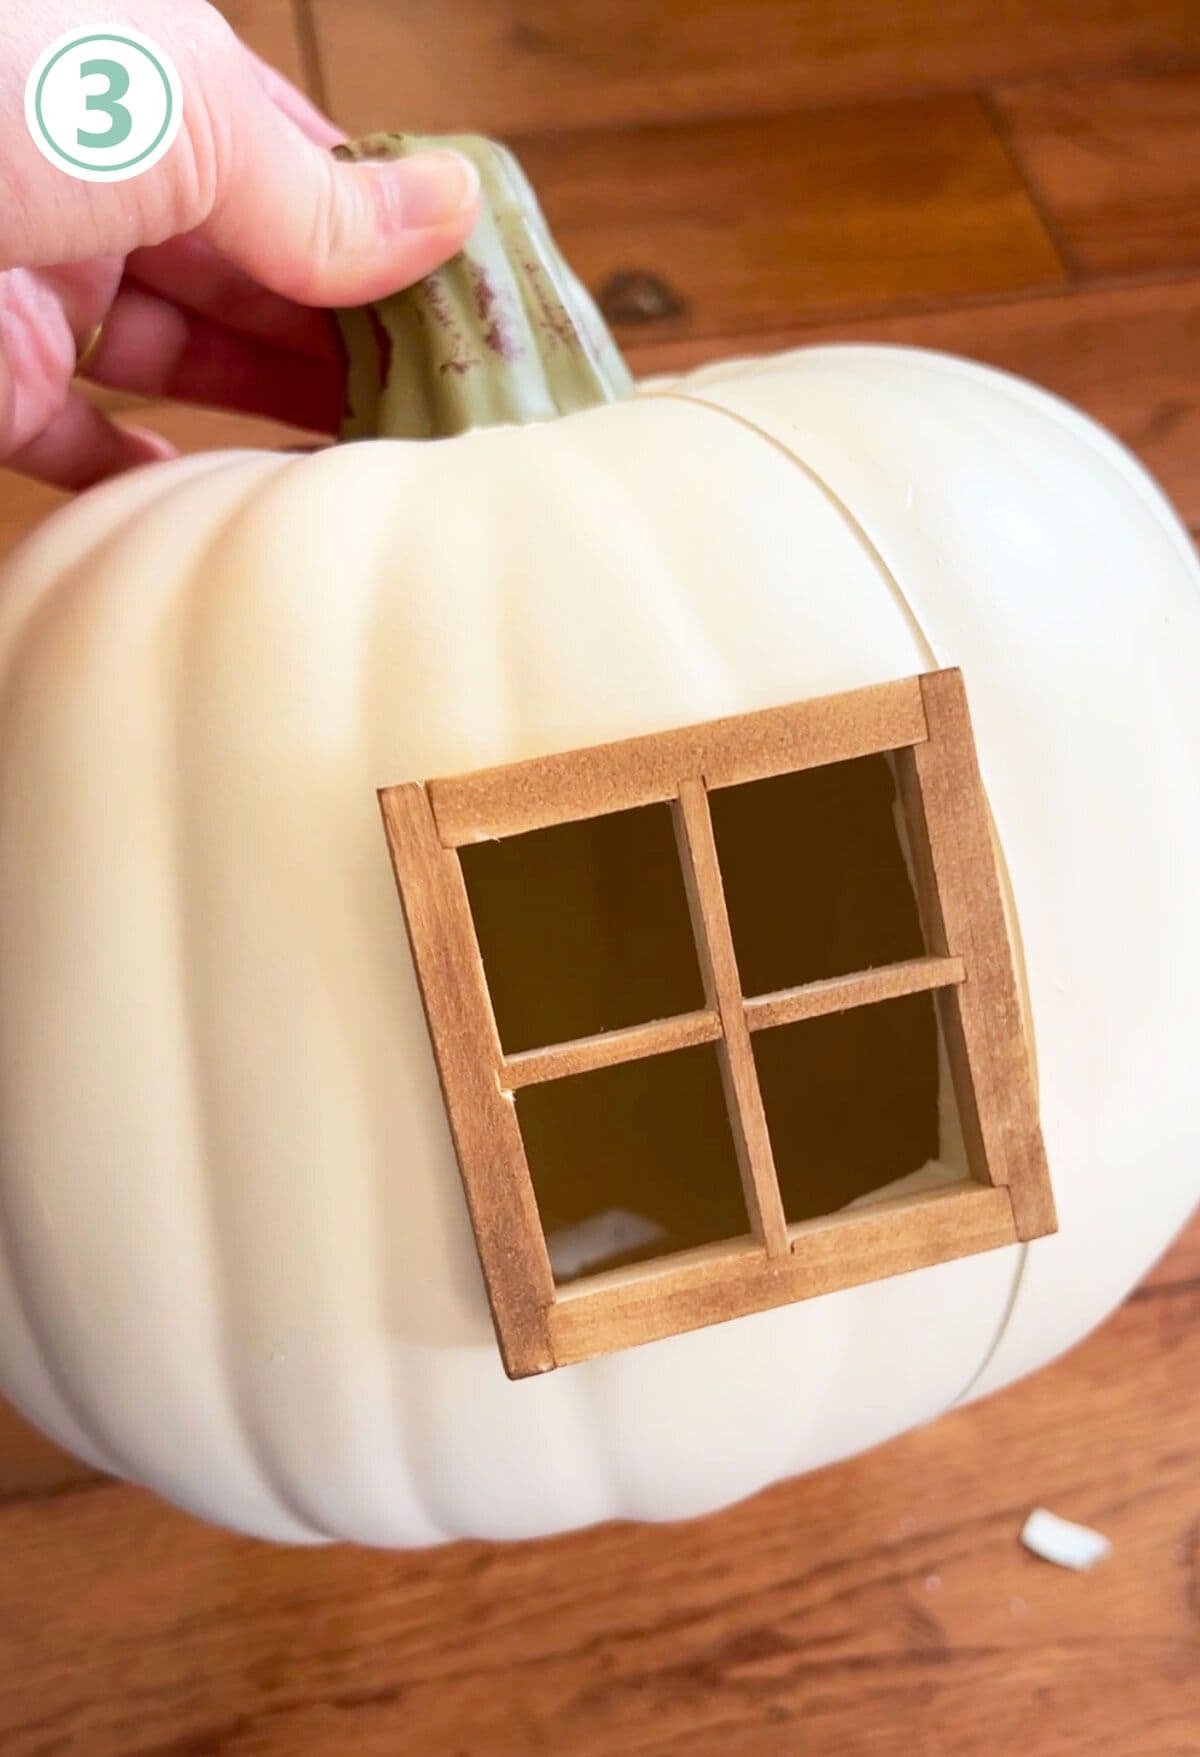 A person is holding a white pumpkin with a window on it.